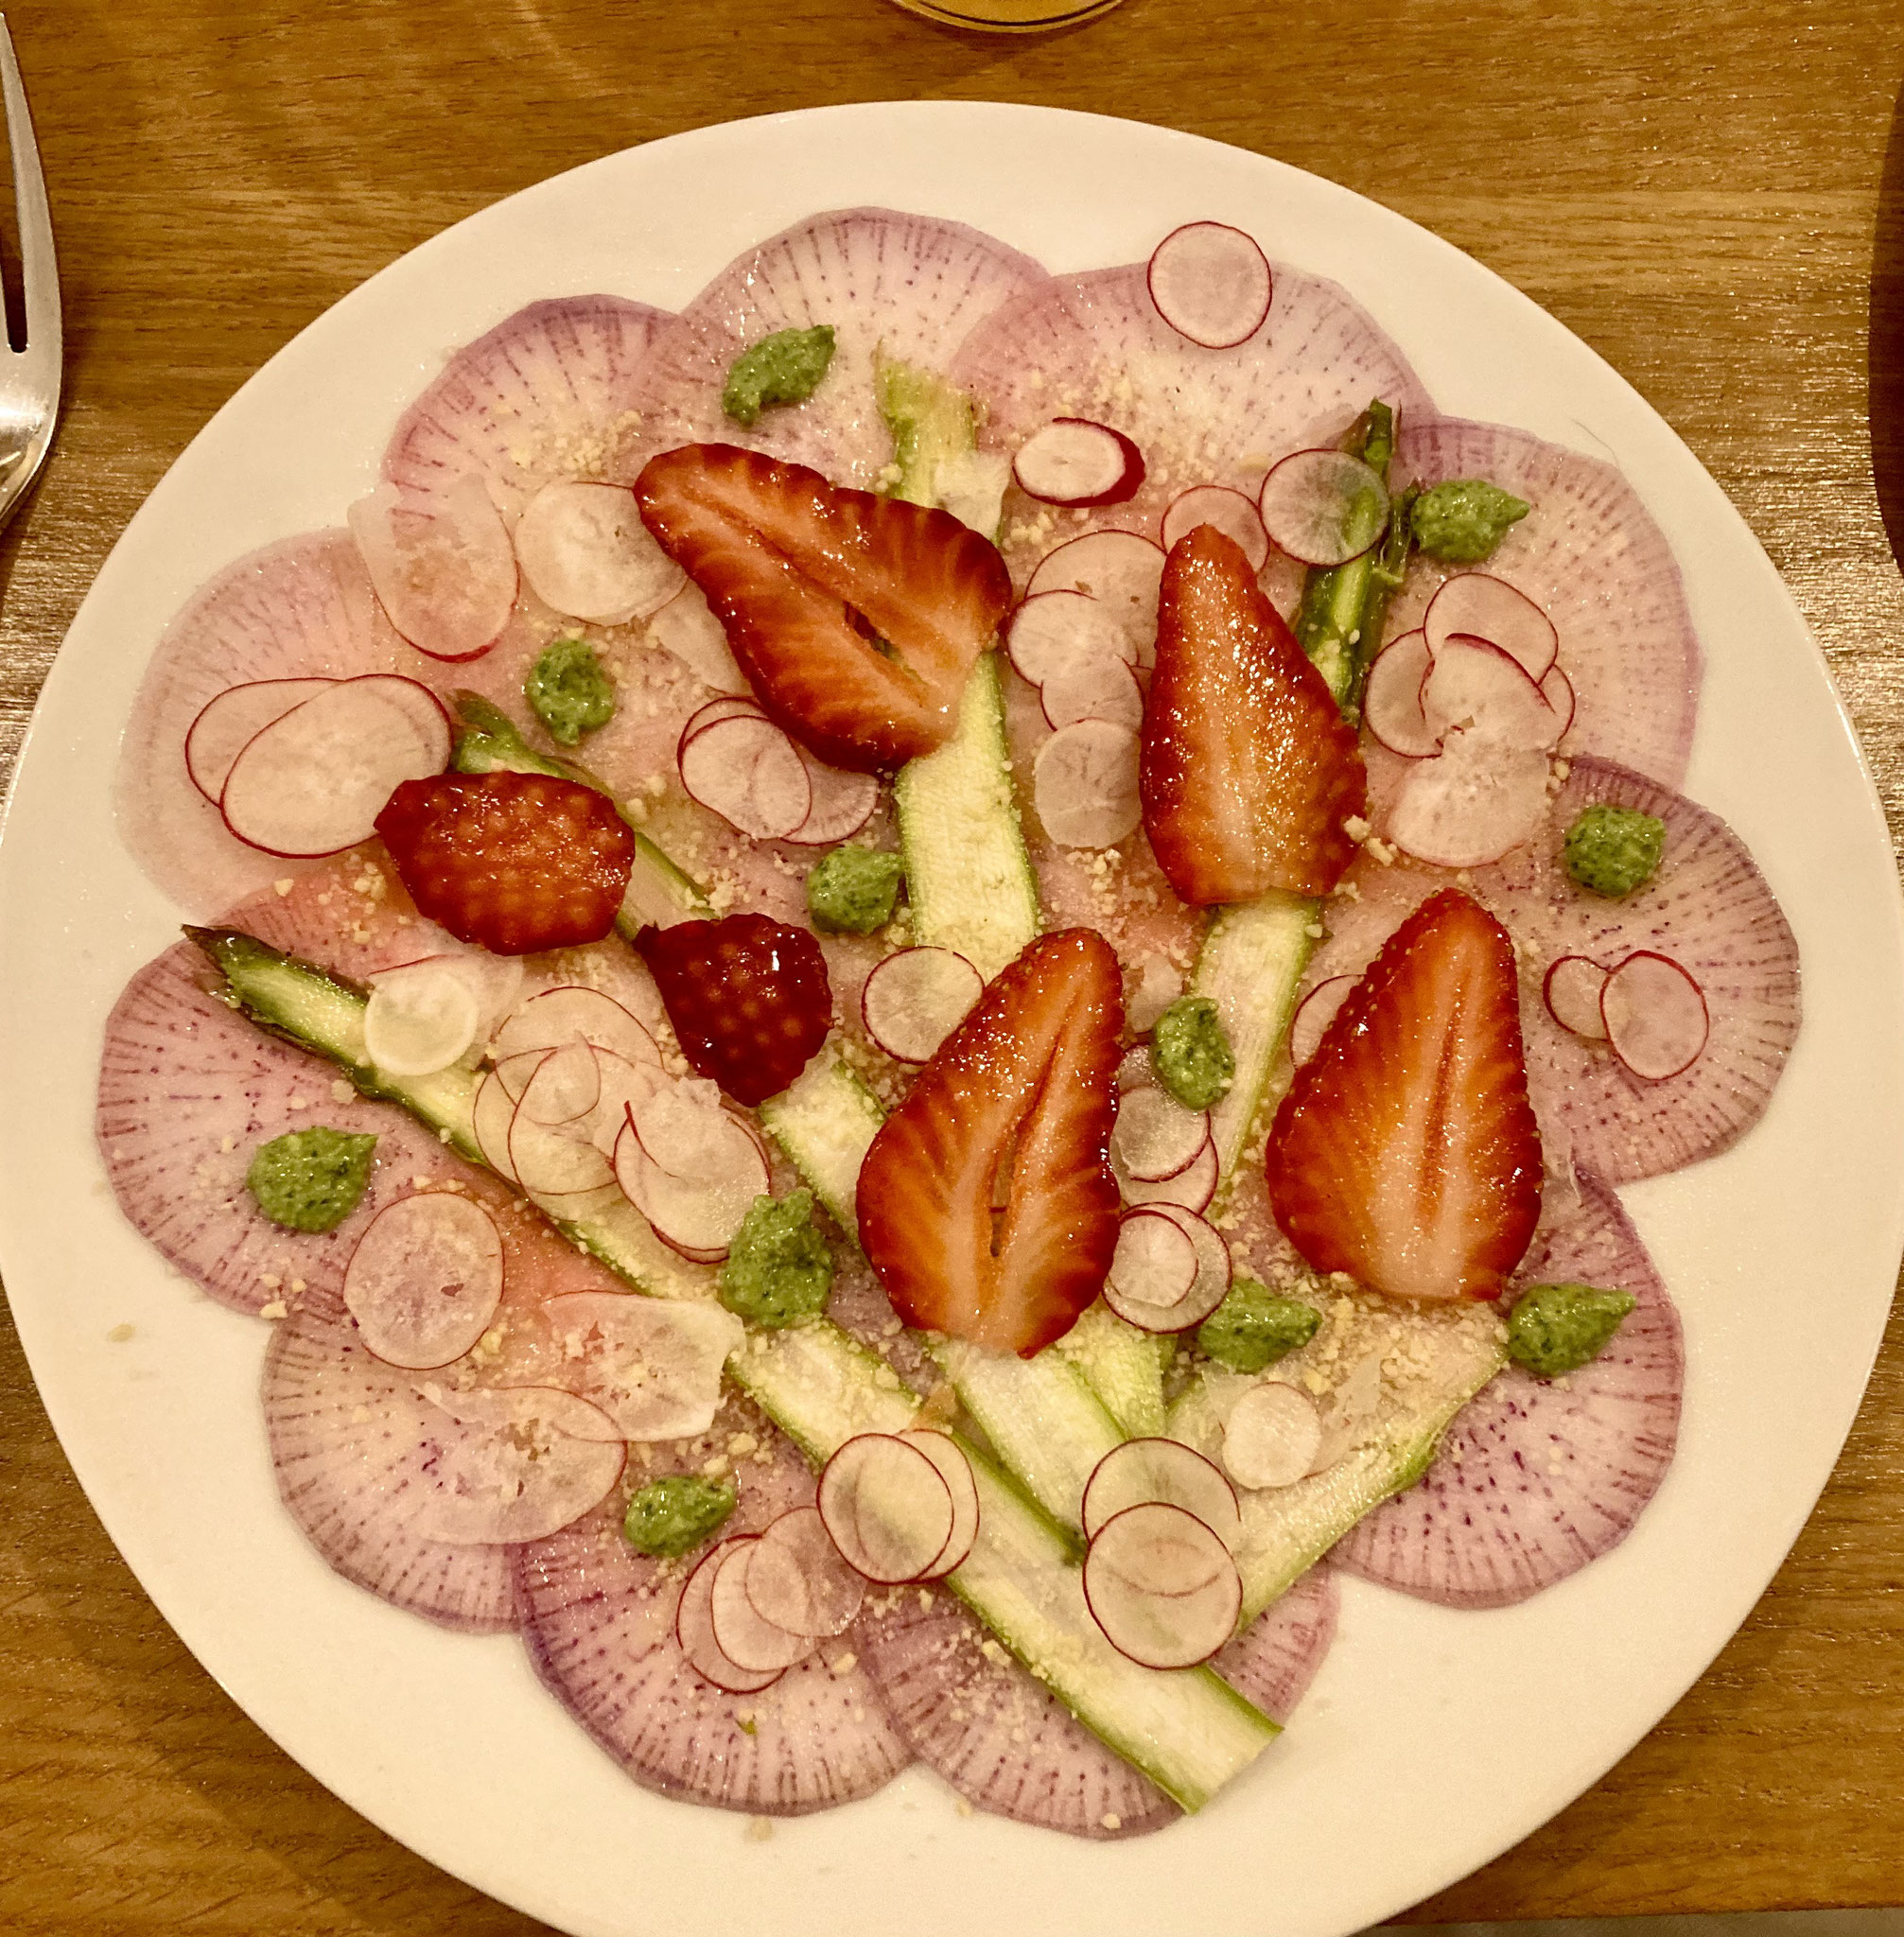 France has such an amazing variety of radishes of all shades and colours